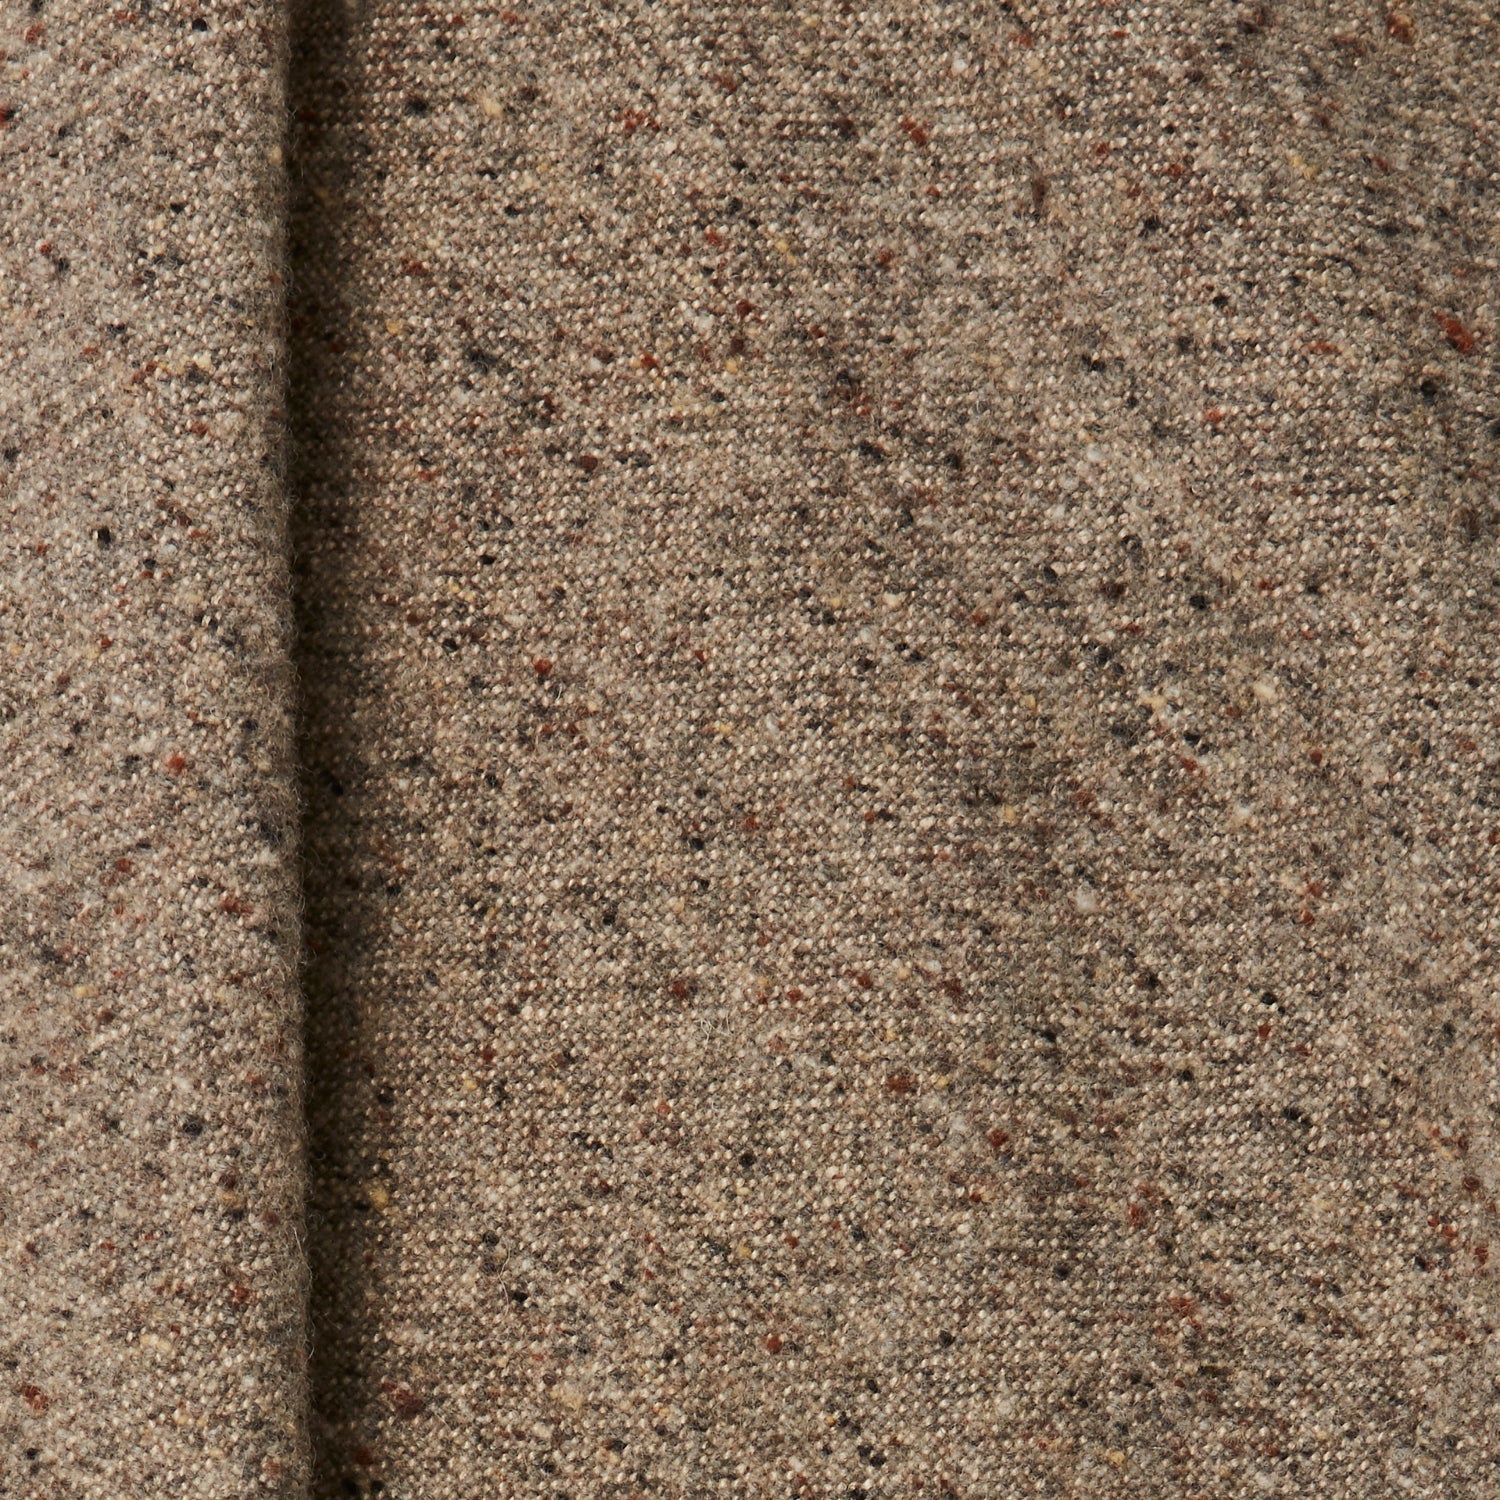 A draped swatch of blended linen-wool mix fabric in a flecked light brown color.